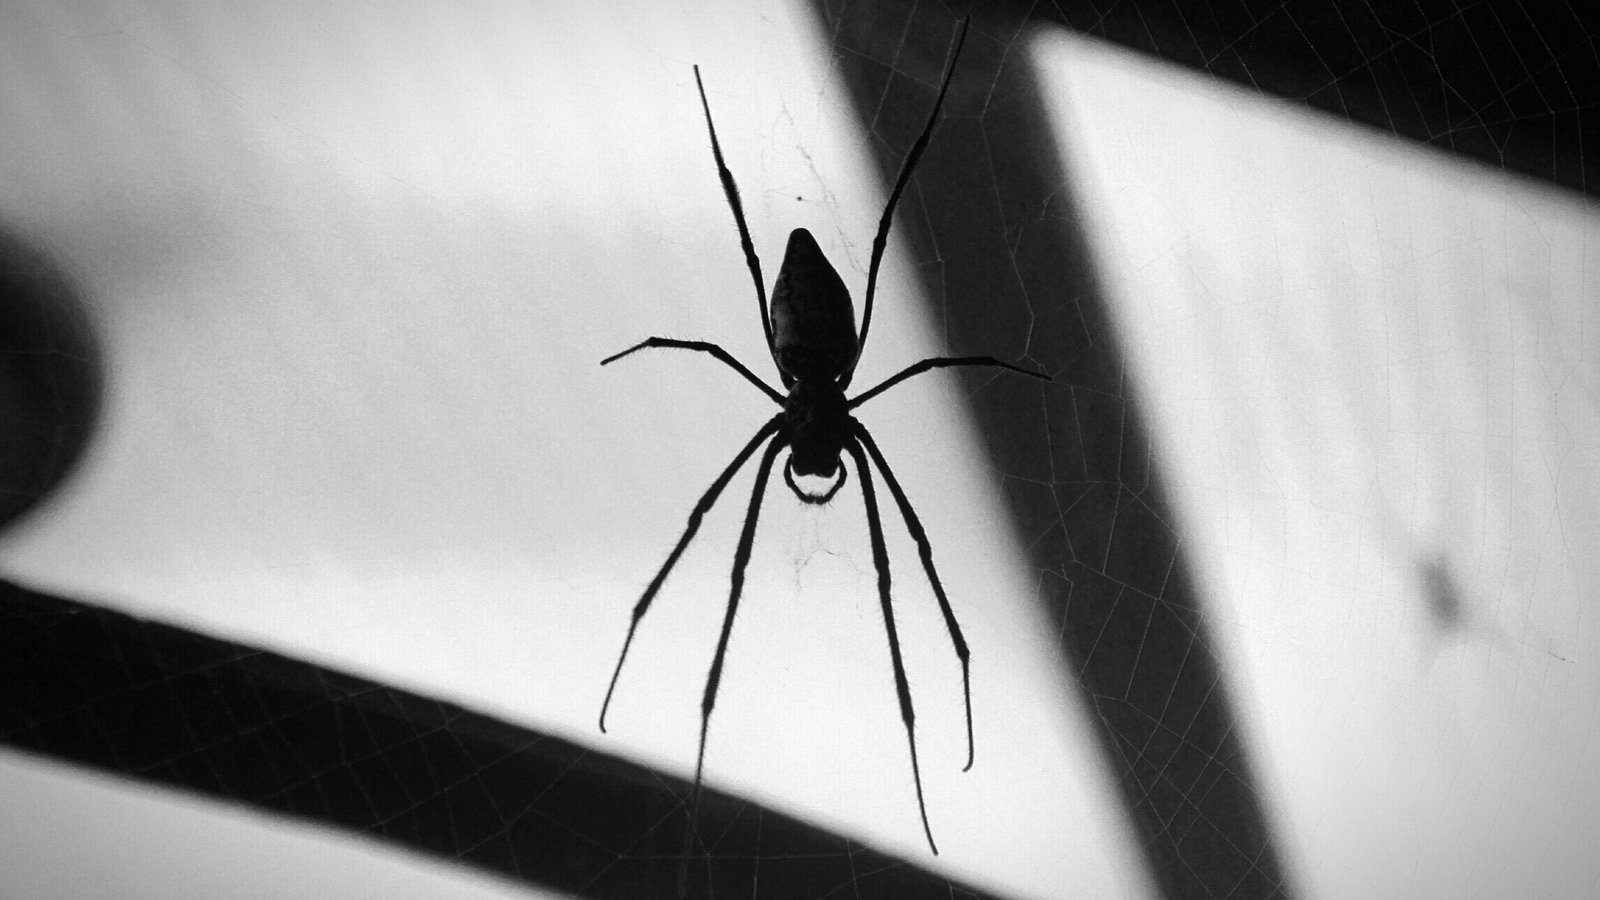 Does killing spiders bring bad luck?